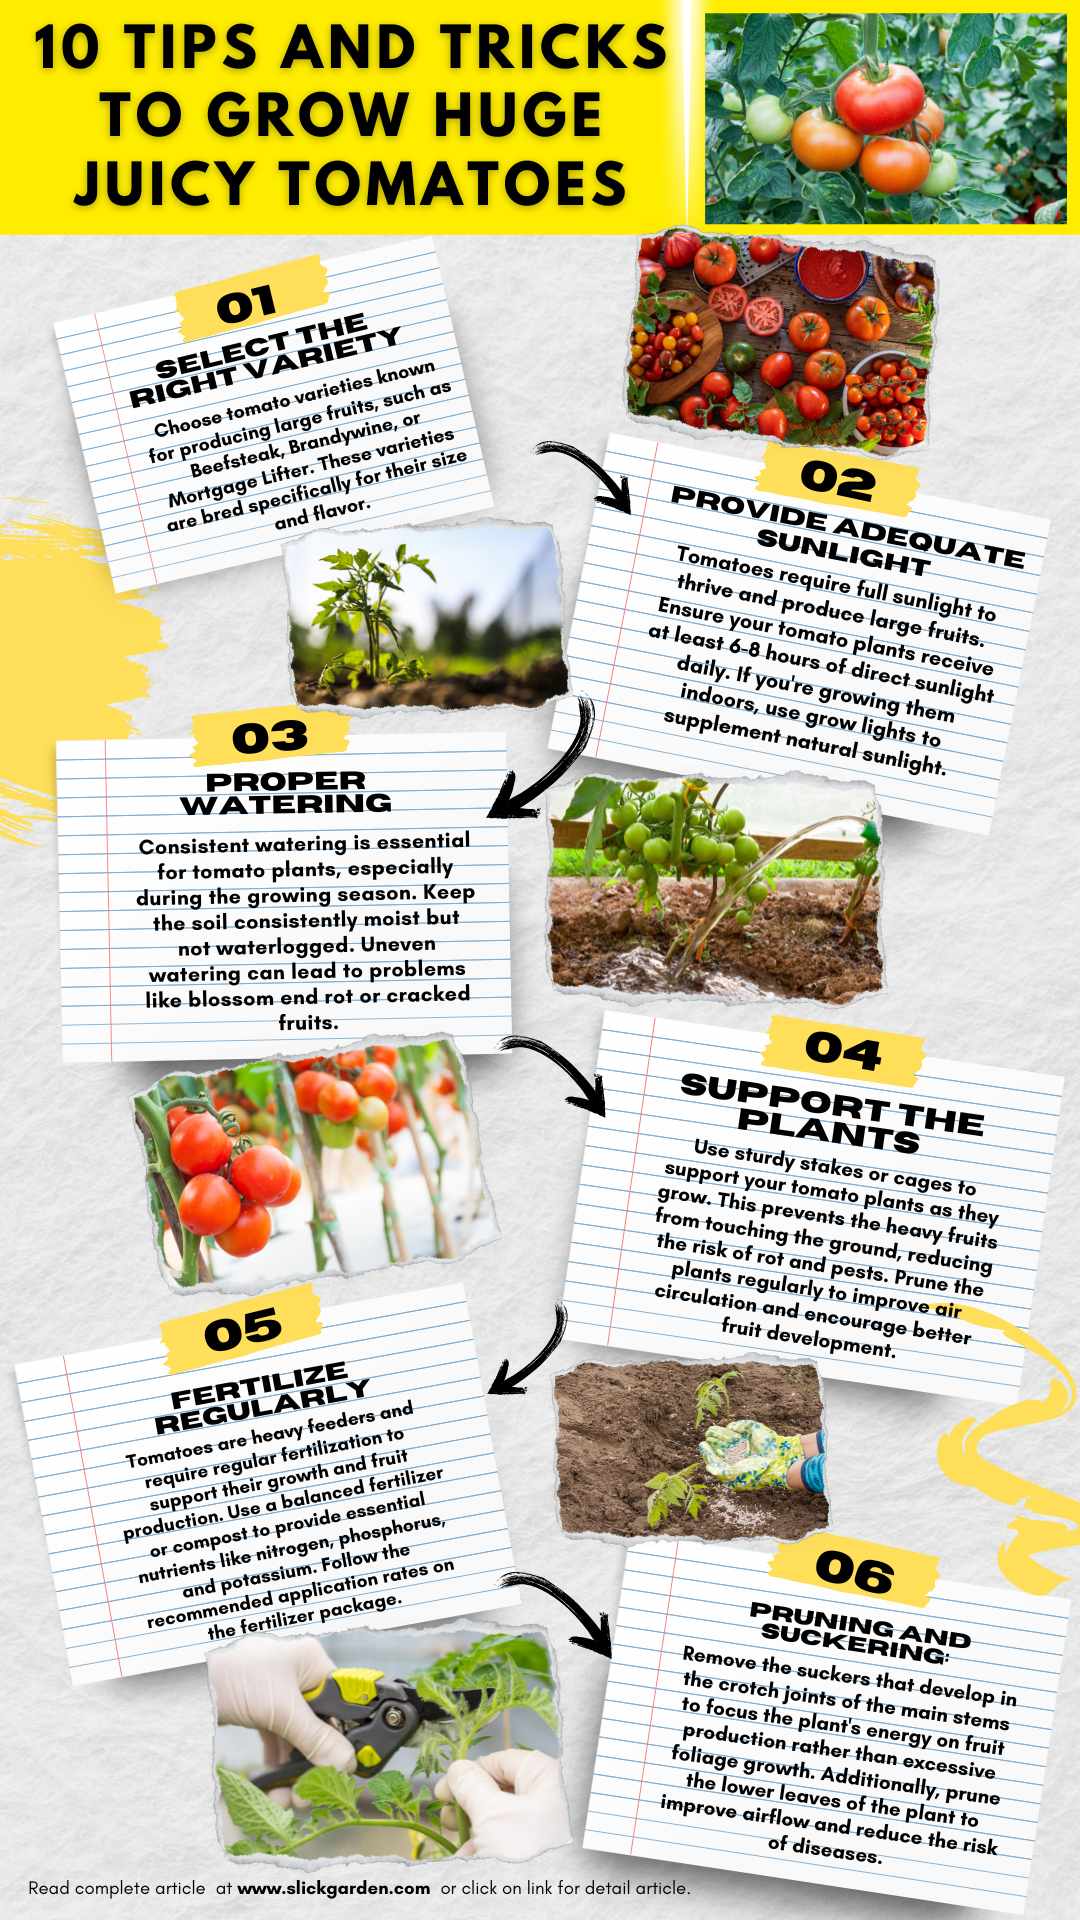 10 Tips and Tricks to Grow Huge Juicy Tomatoes - infographic